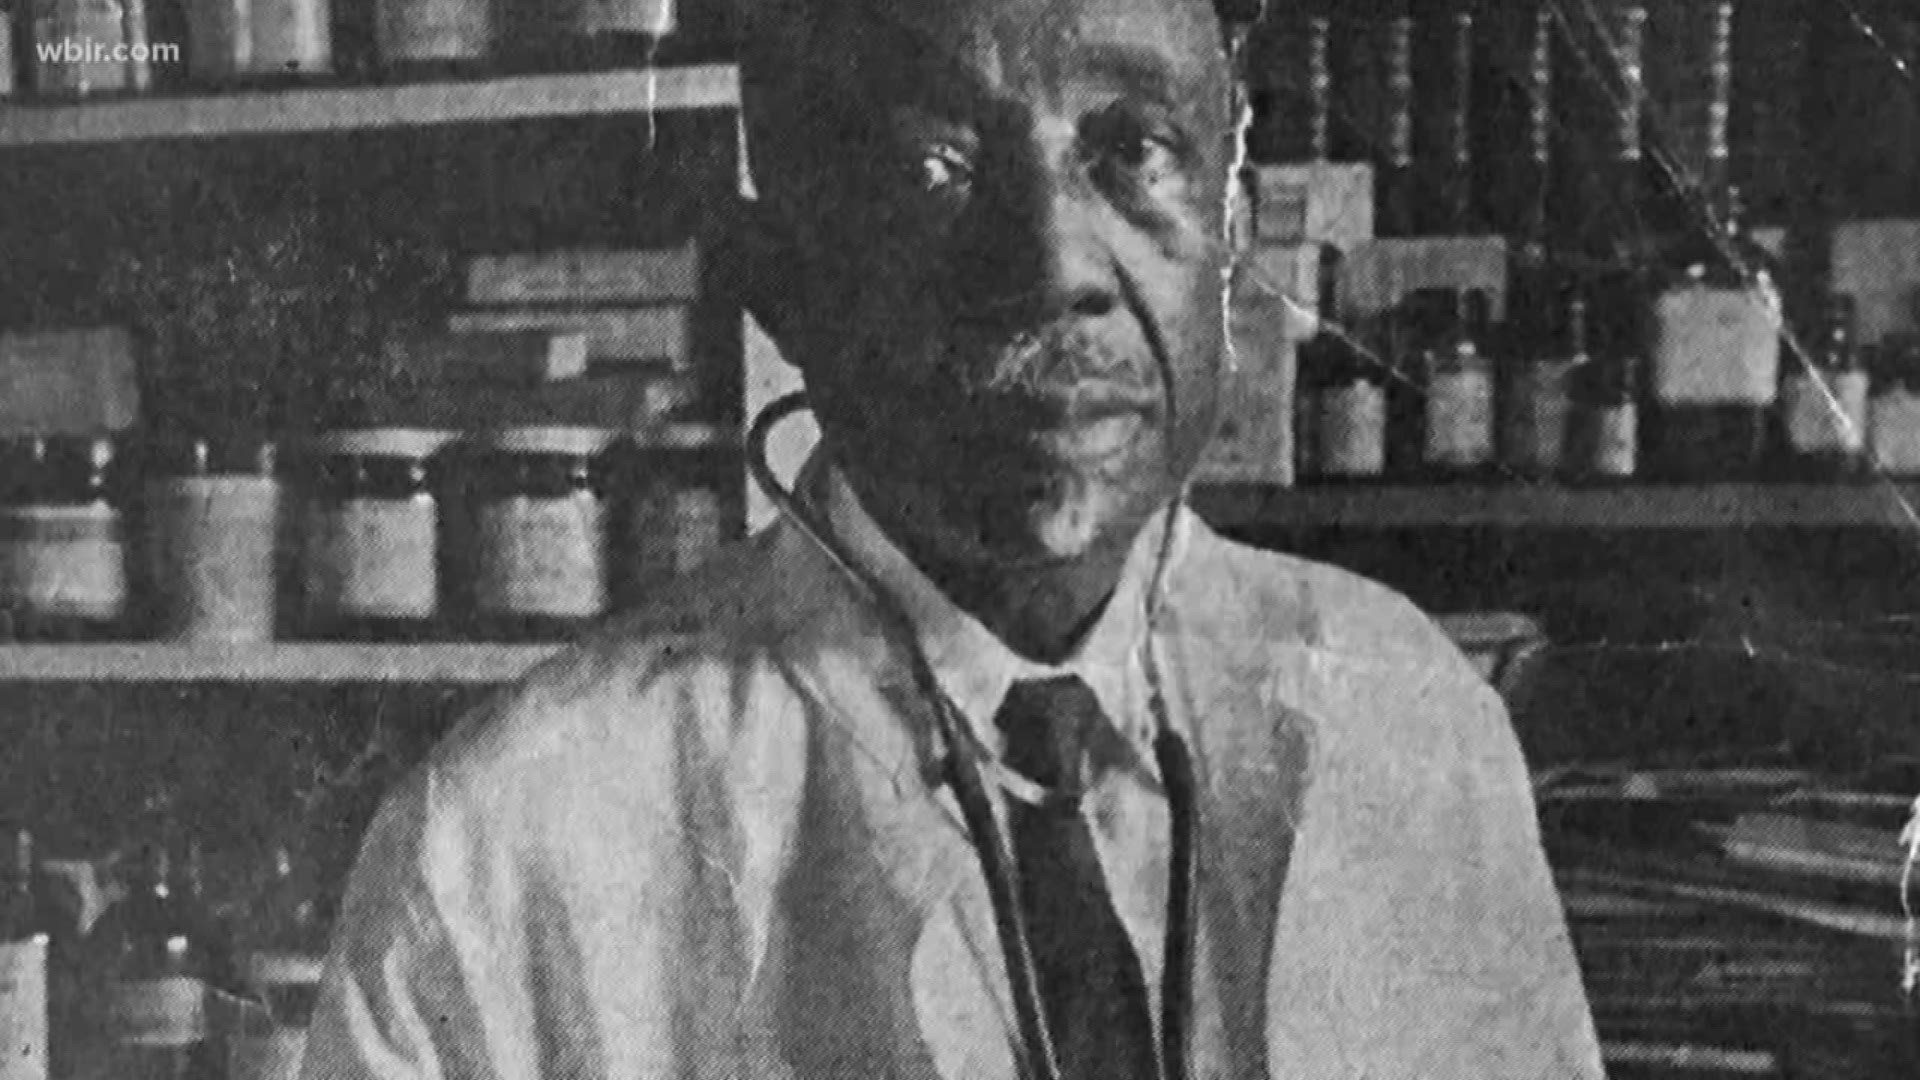 Cocke County physician Dr. Dennis Branch overcame the Jim Crow era to serve patients of all colors.